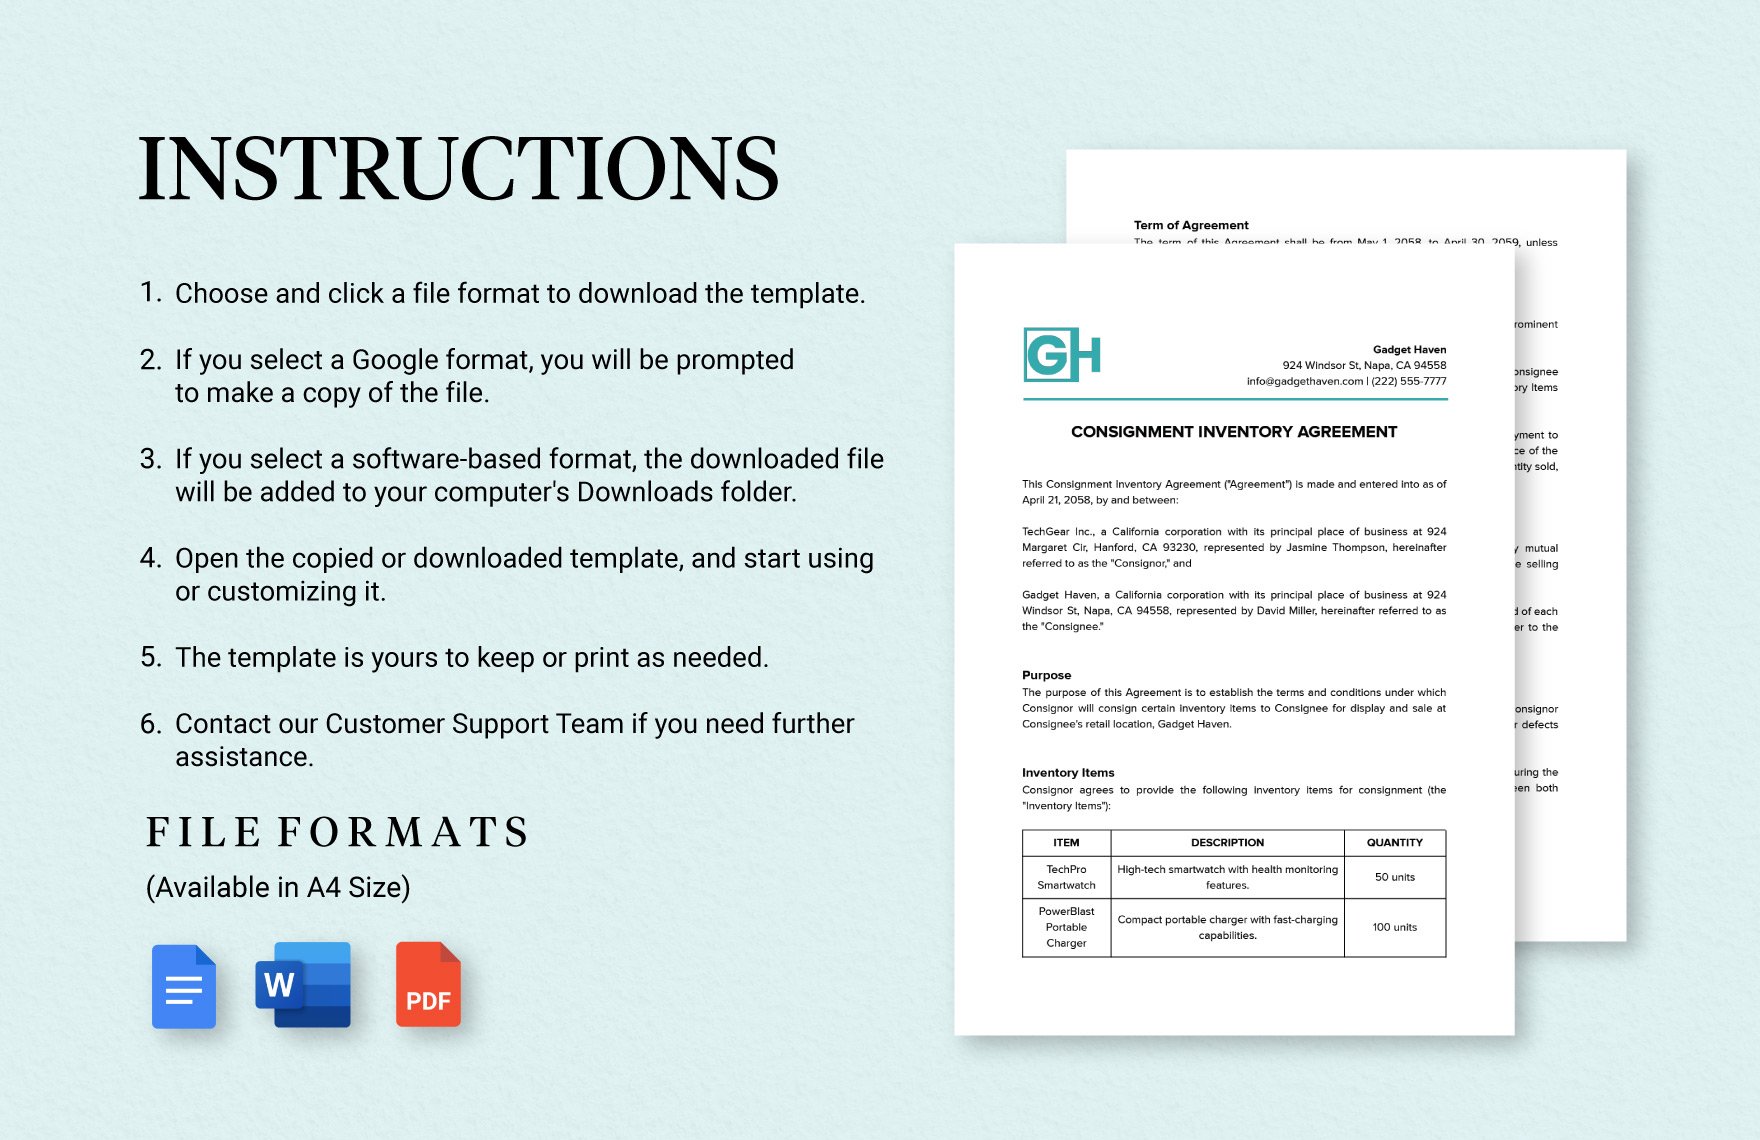 Consignment Inventory Agreement Template